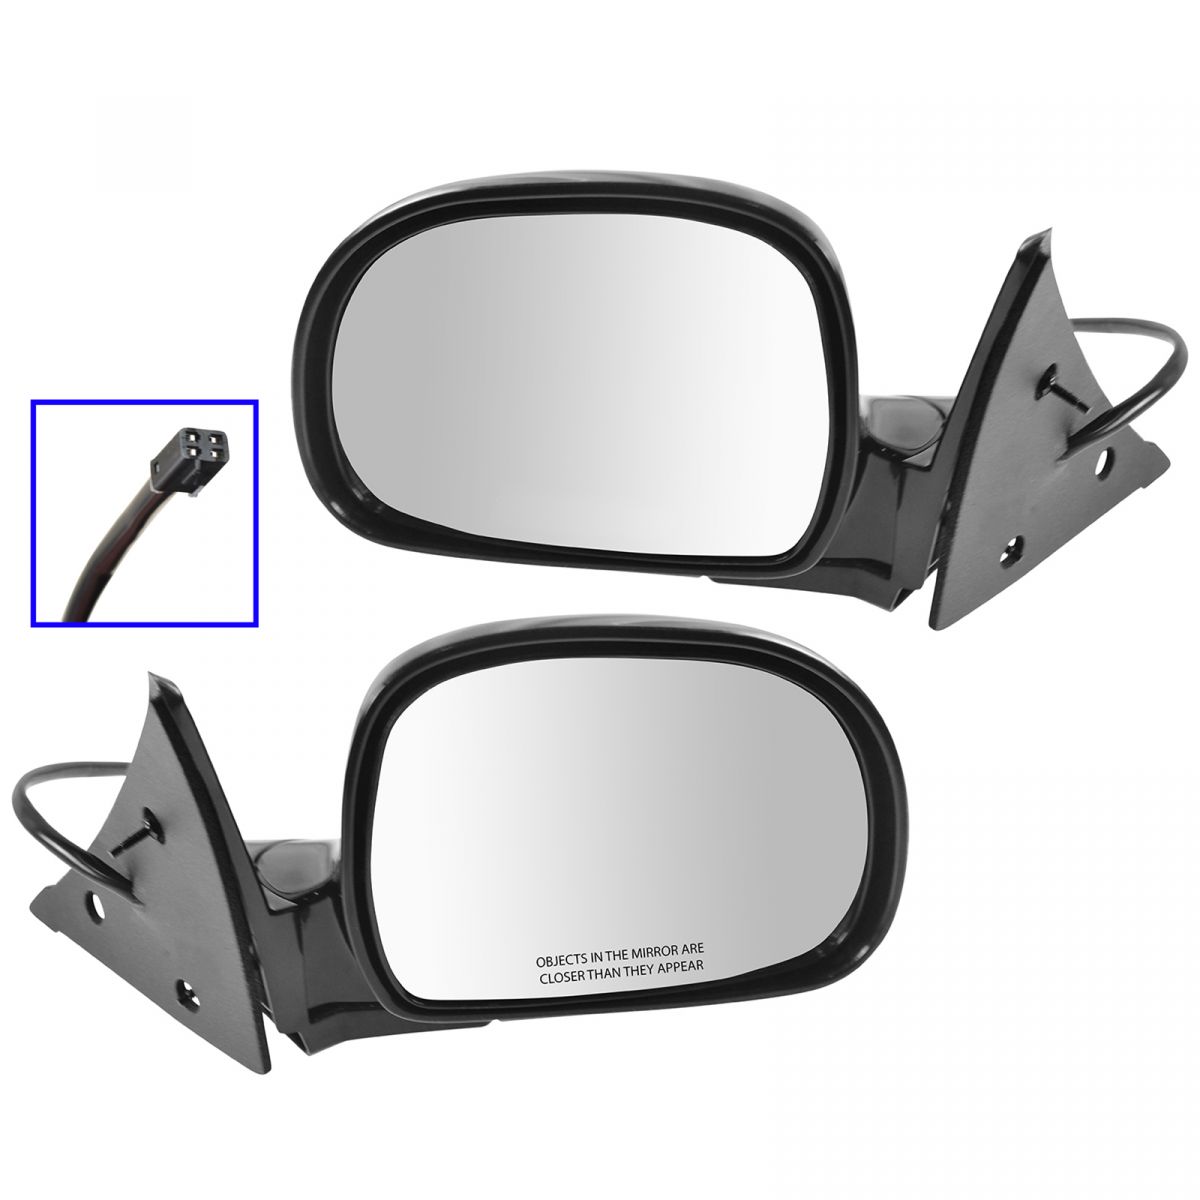 Pair Mirrors Set of 2 New Right-and-Left Chevy Olds S-10 BLAZER S10 Pickup Jimmy